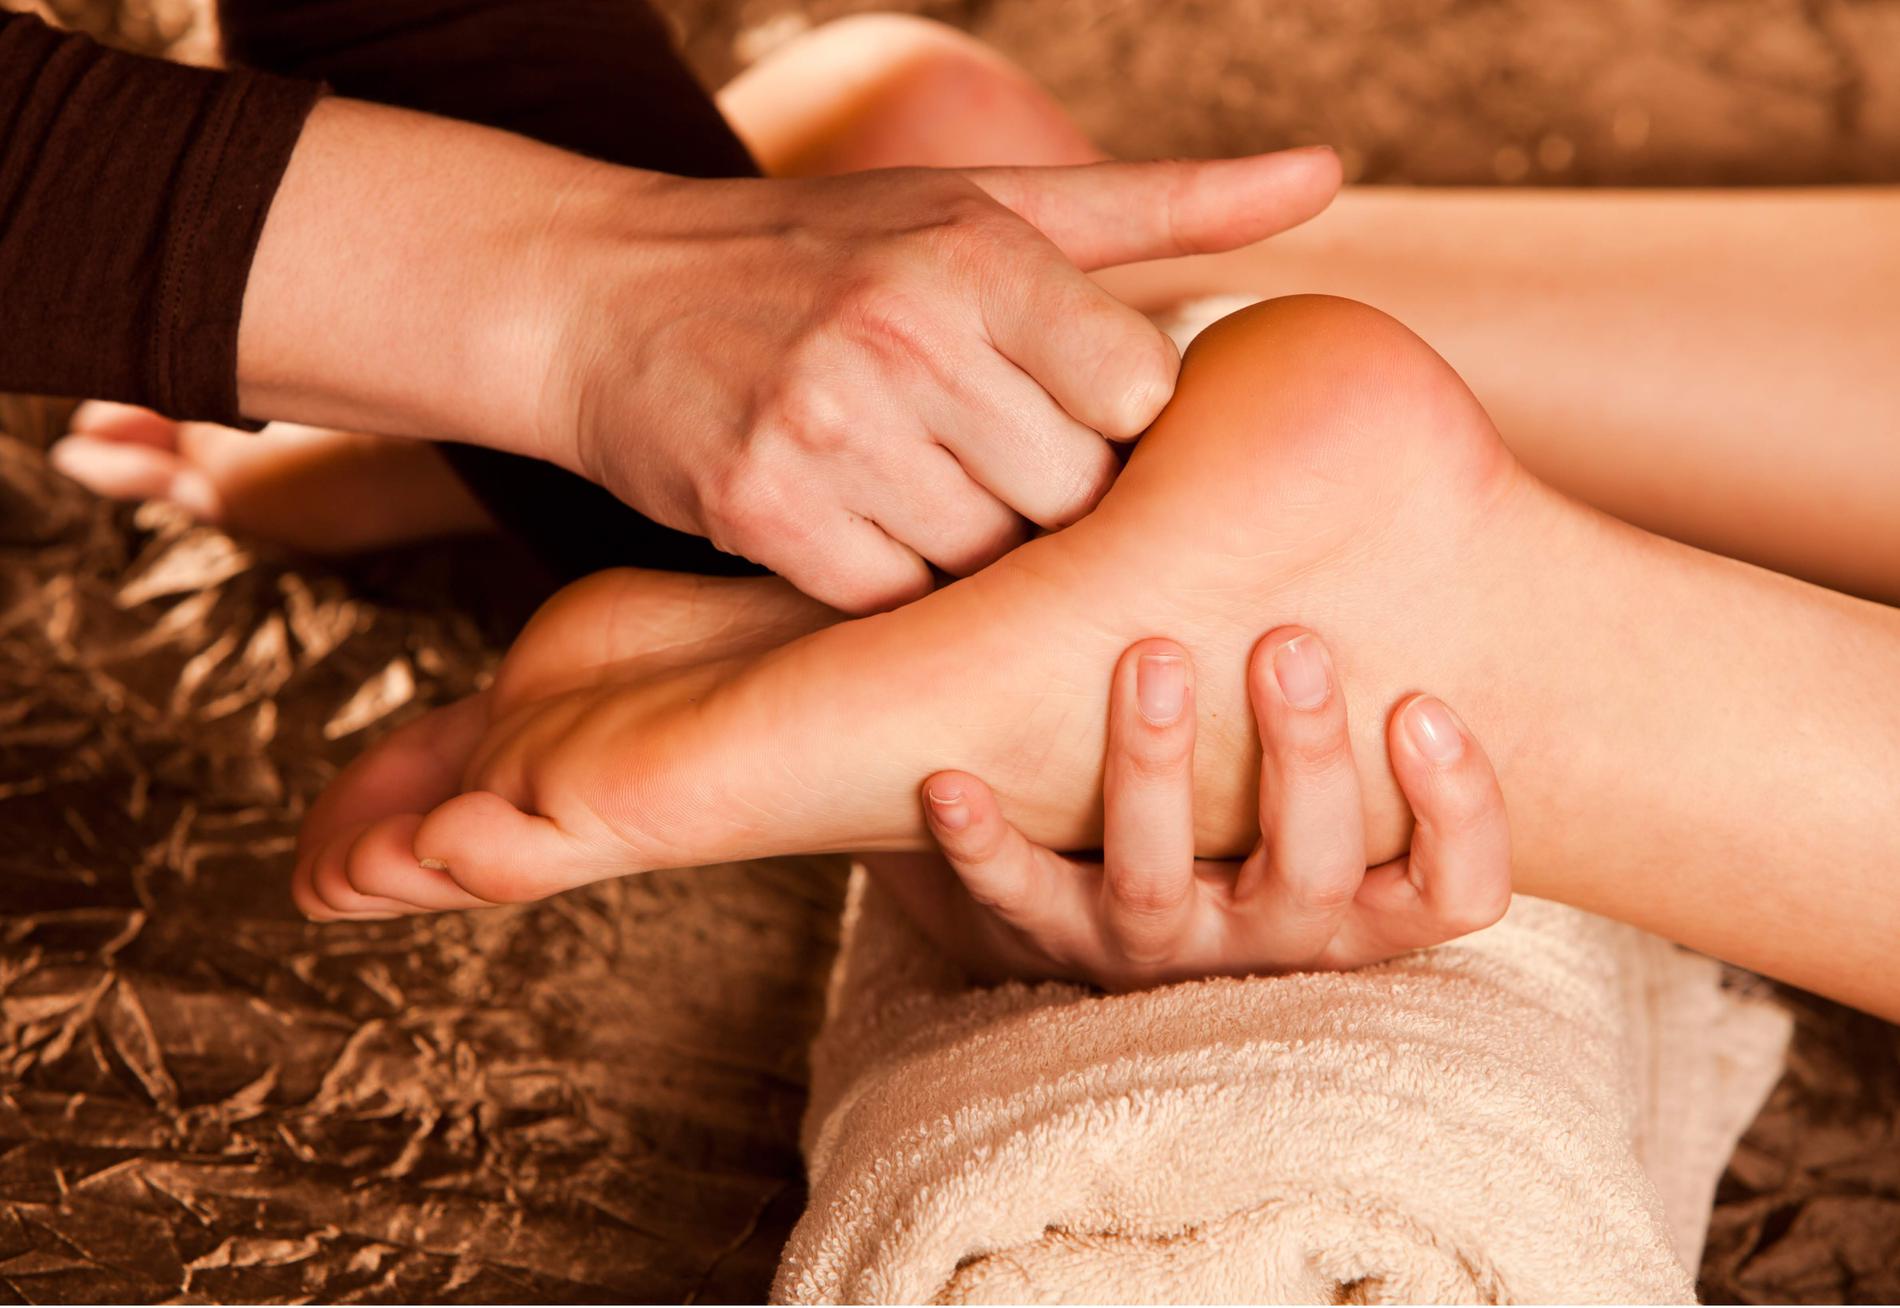 Orchid Massage & Spa Specializes in Therapeutic Massages & Special  Treatments | Orchid Massage & Spa